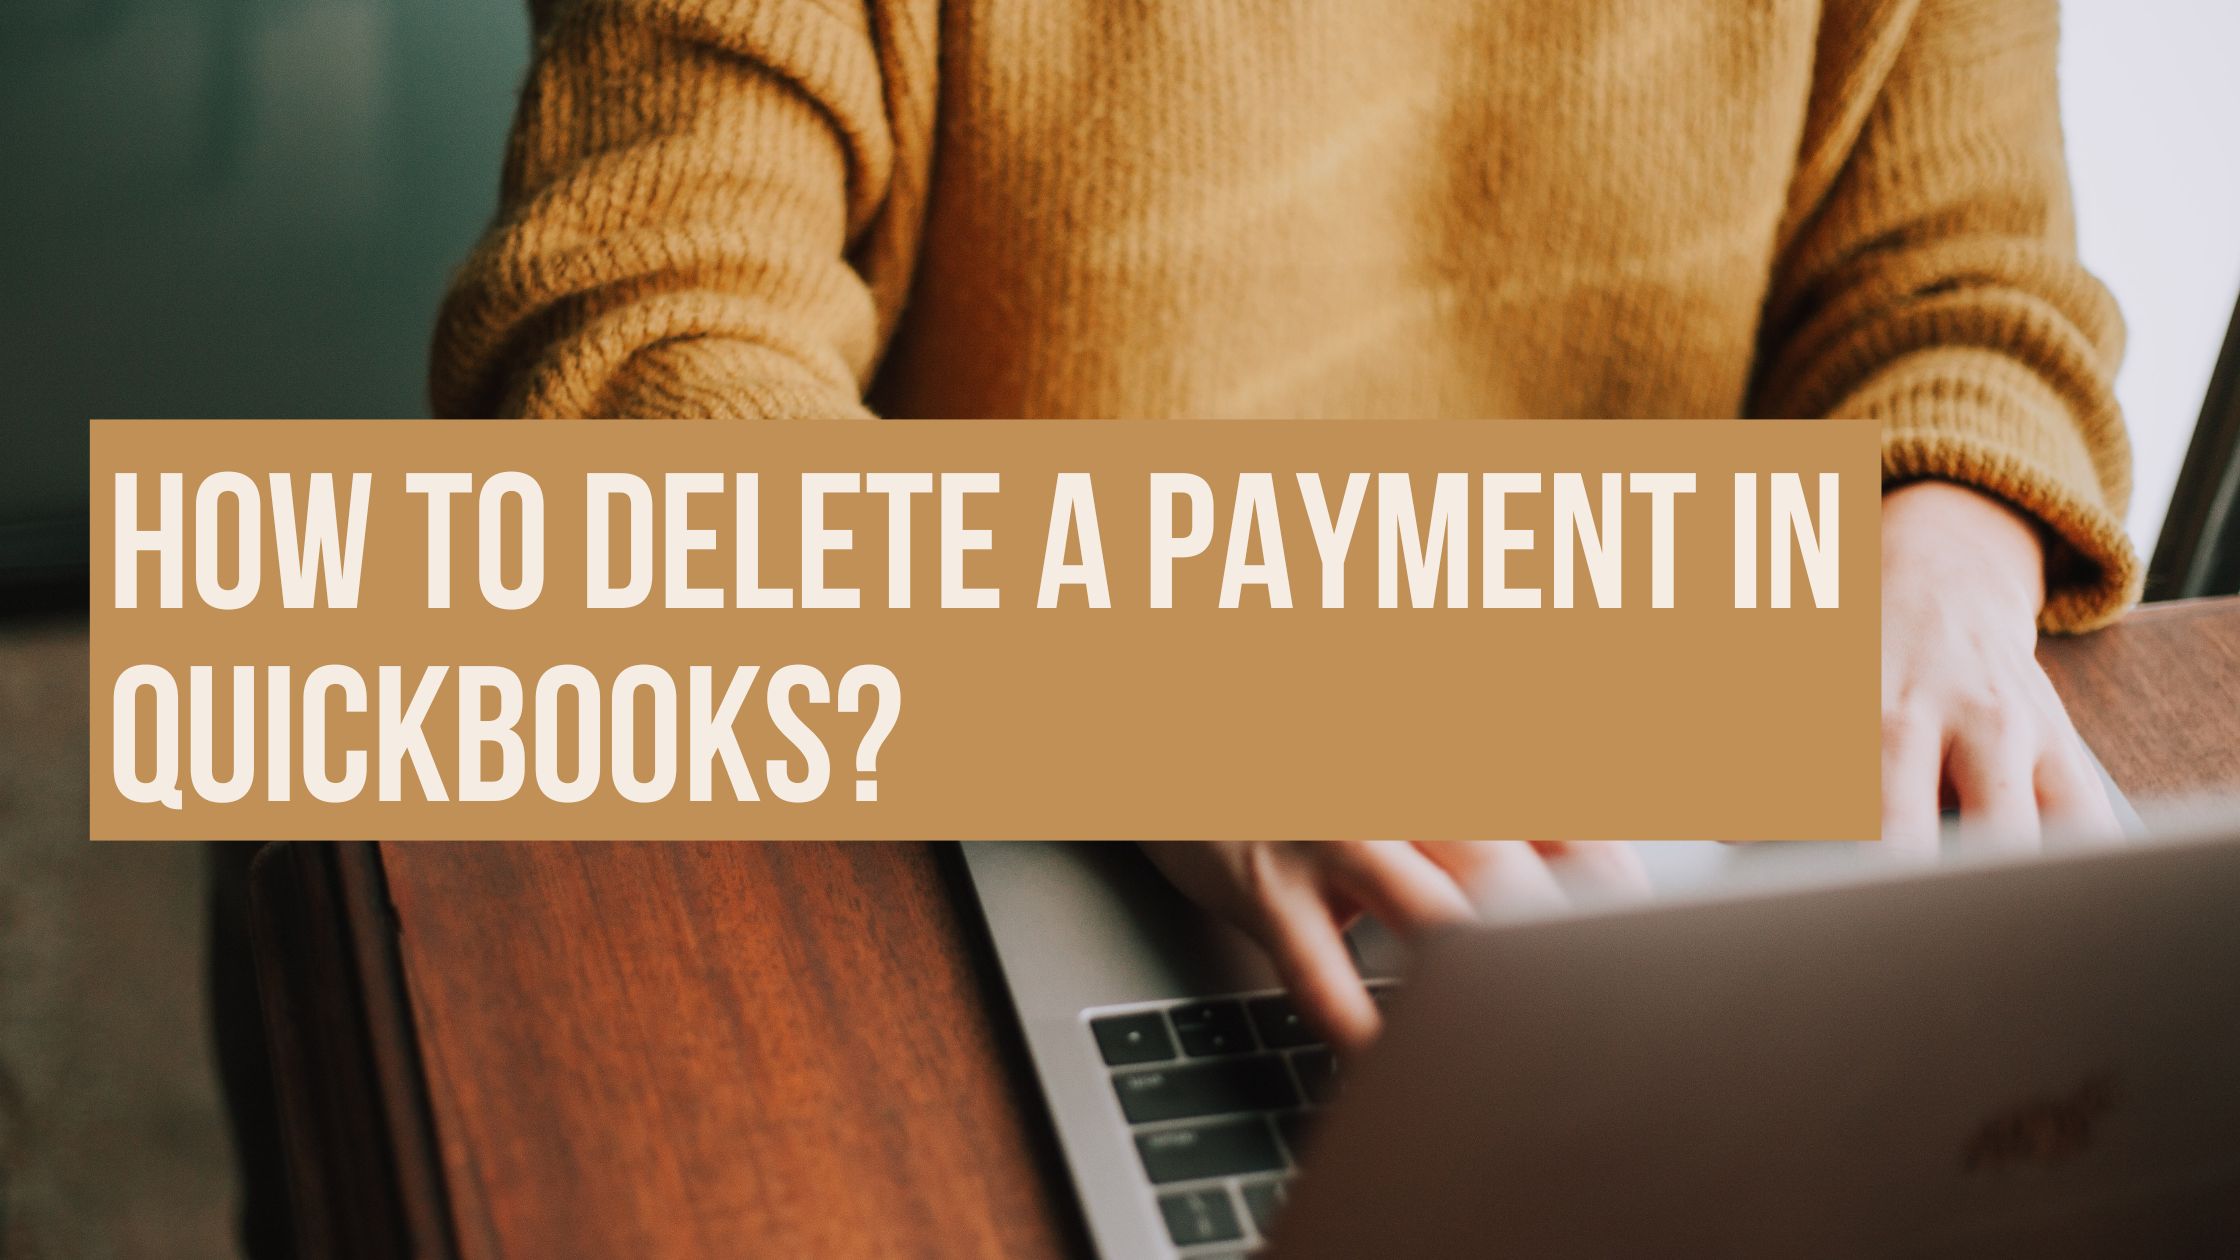 How To Delete a Payment in QuickBooks?